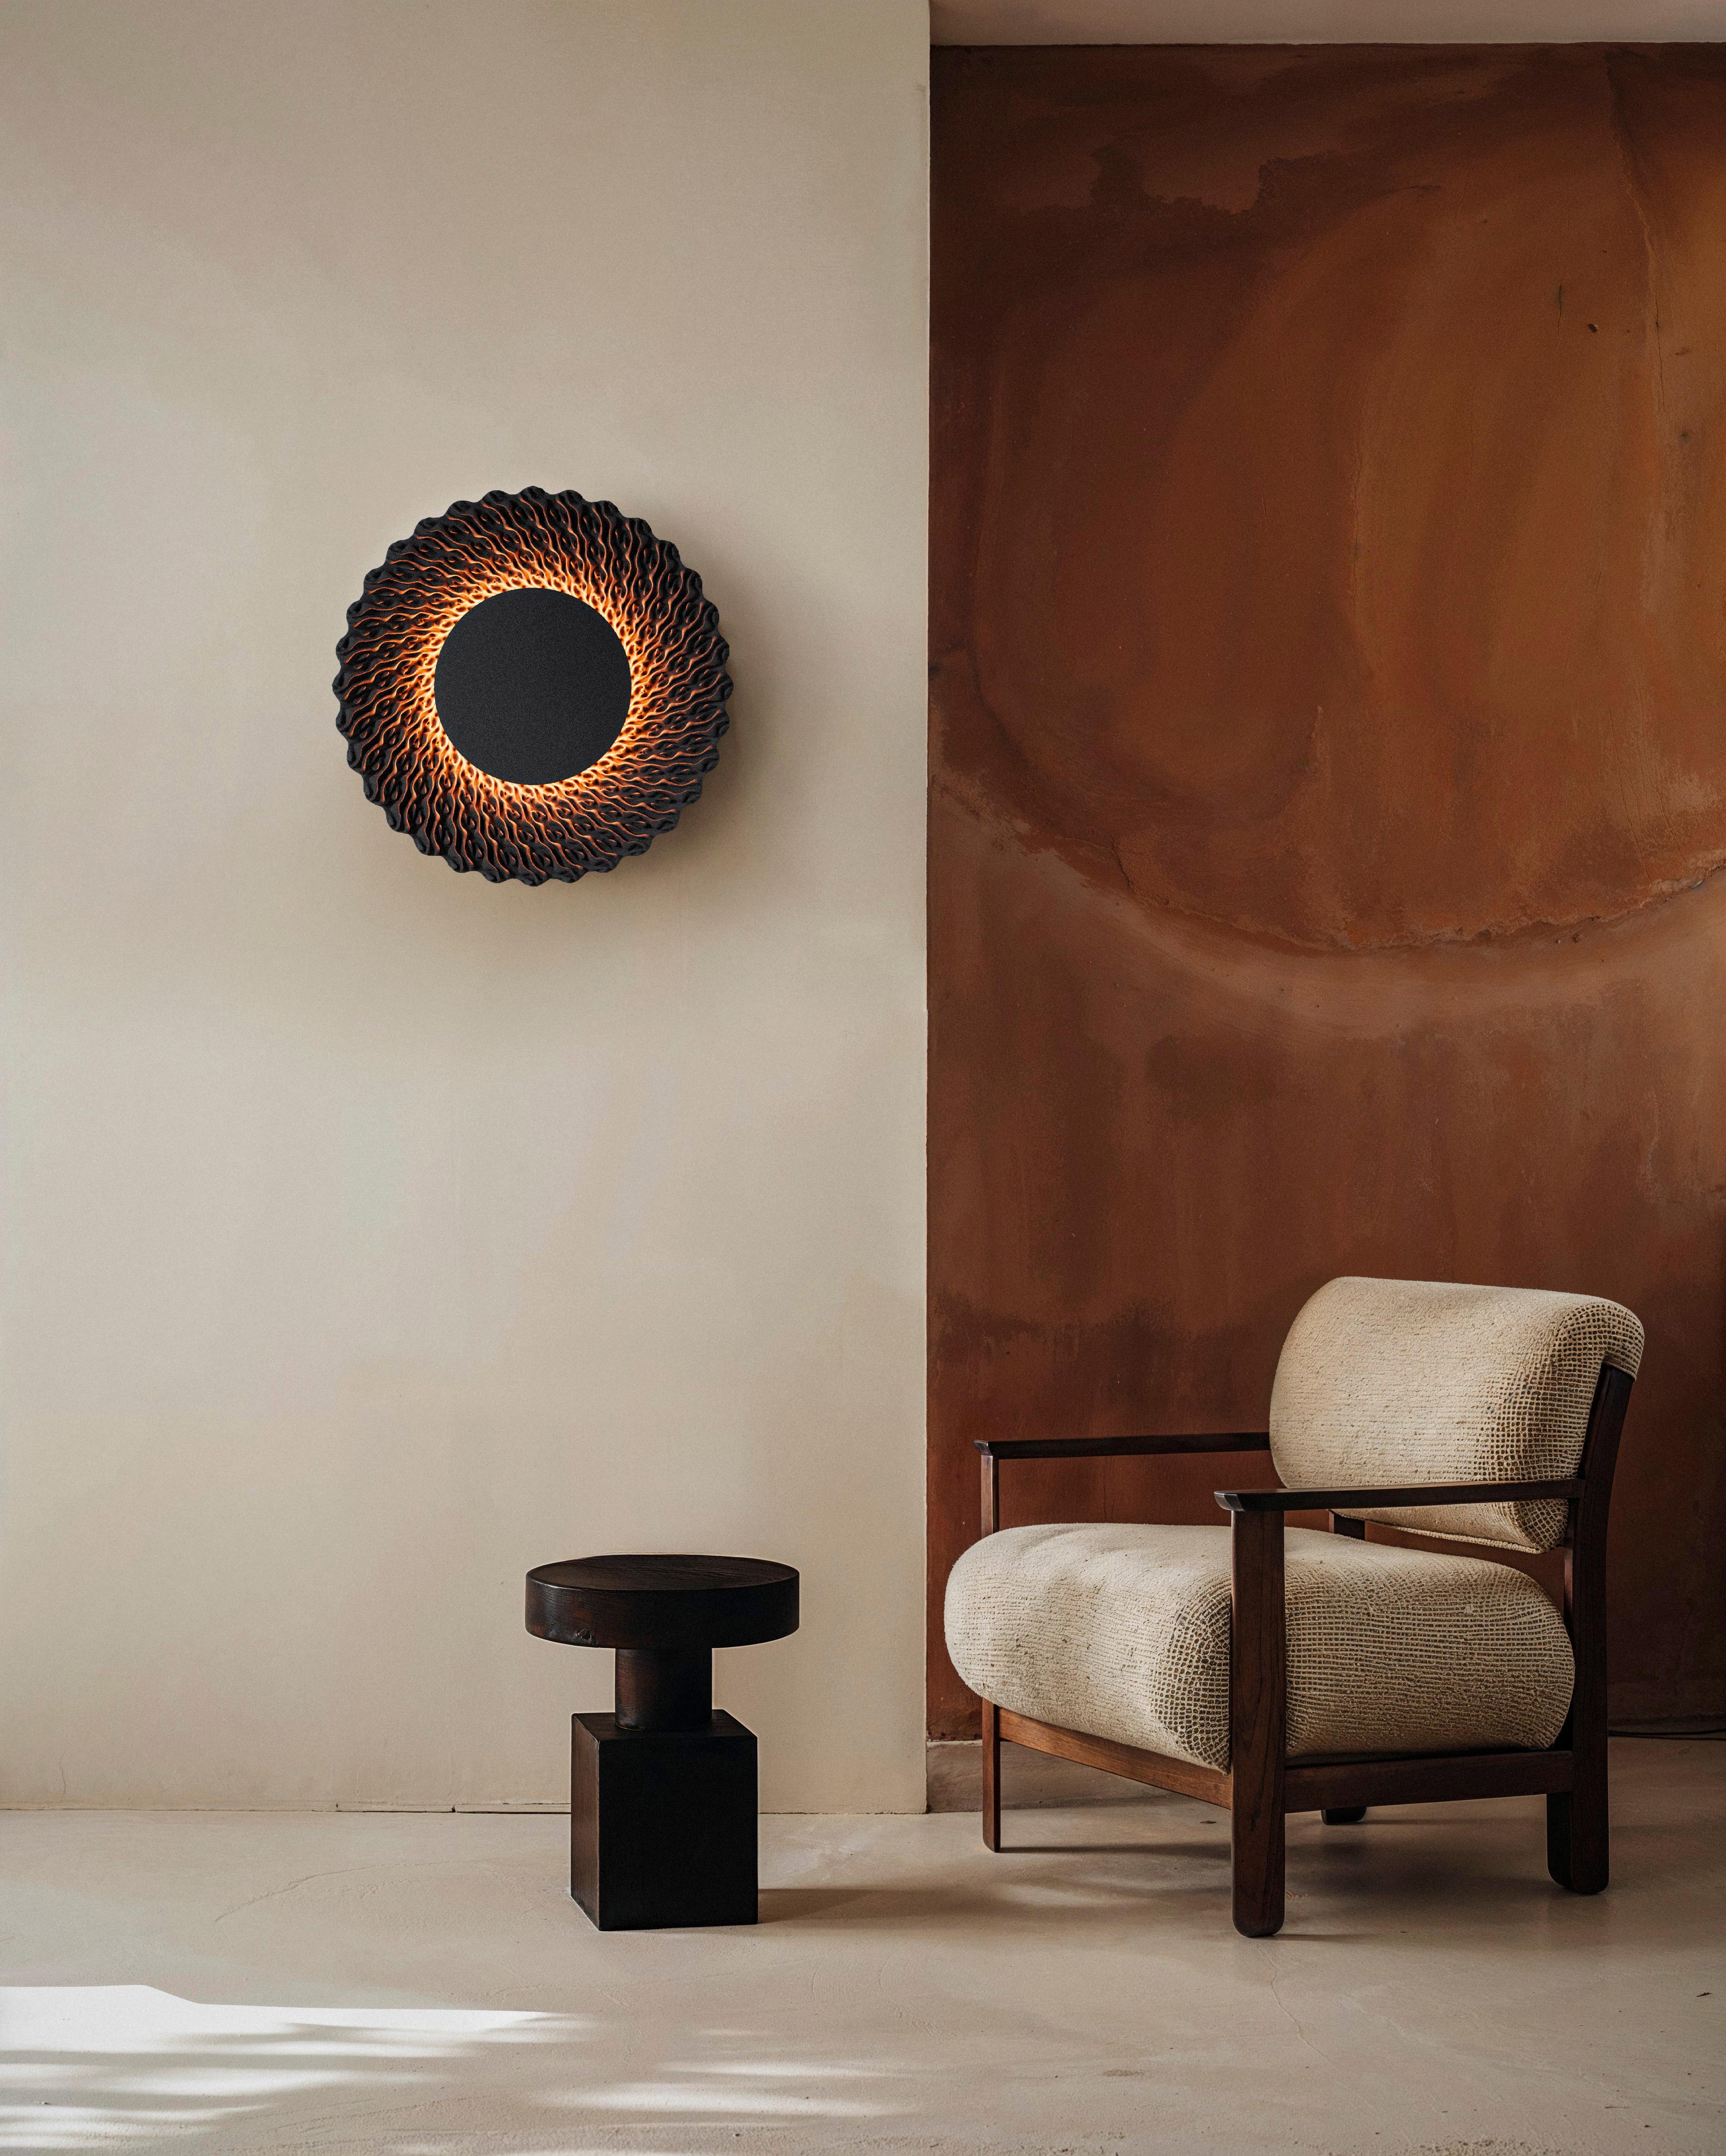 Sunflower Shadows ~ Nature's Palette in Modern Lighting

Introducing the Aureole Collection by Rollo Studio - a fusion of cutting-edge digital design and production techniques, culminating in a series of wall-mounted lamps that redefine the